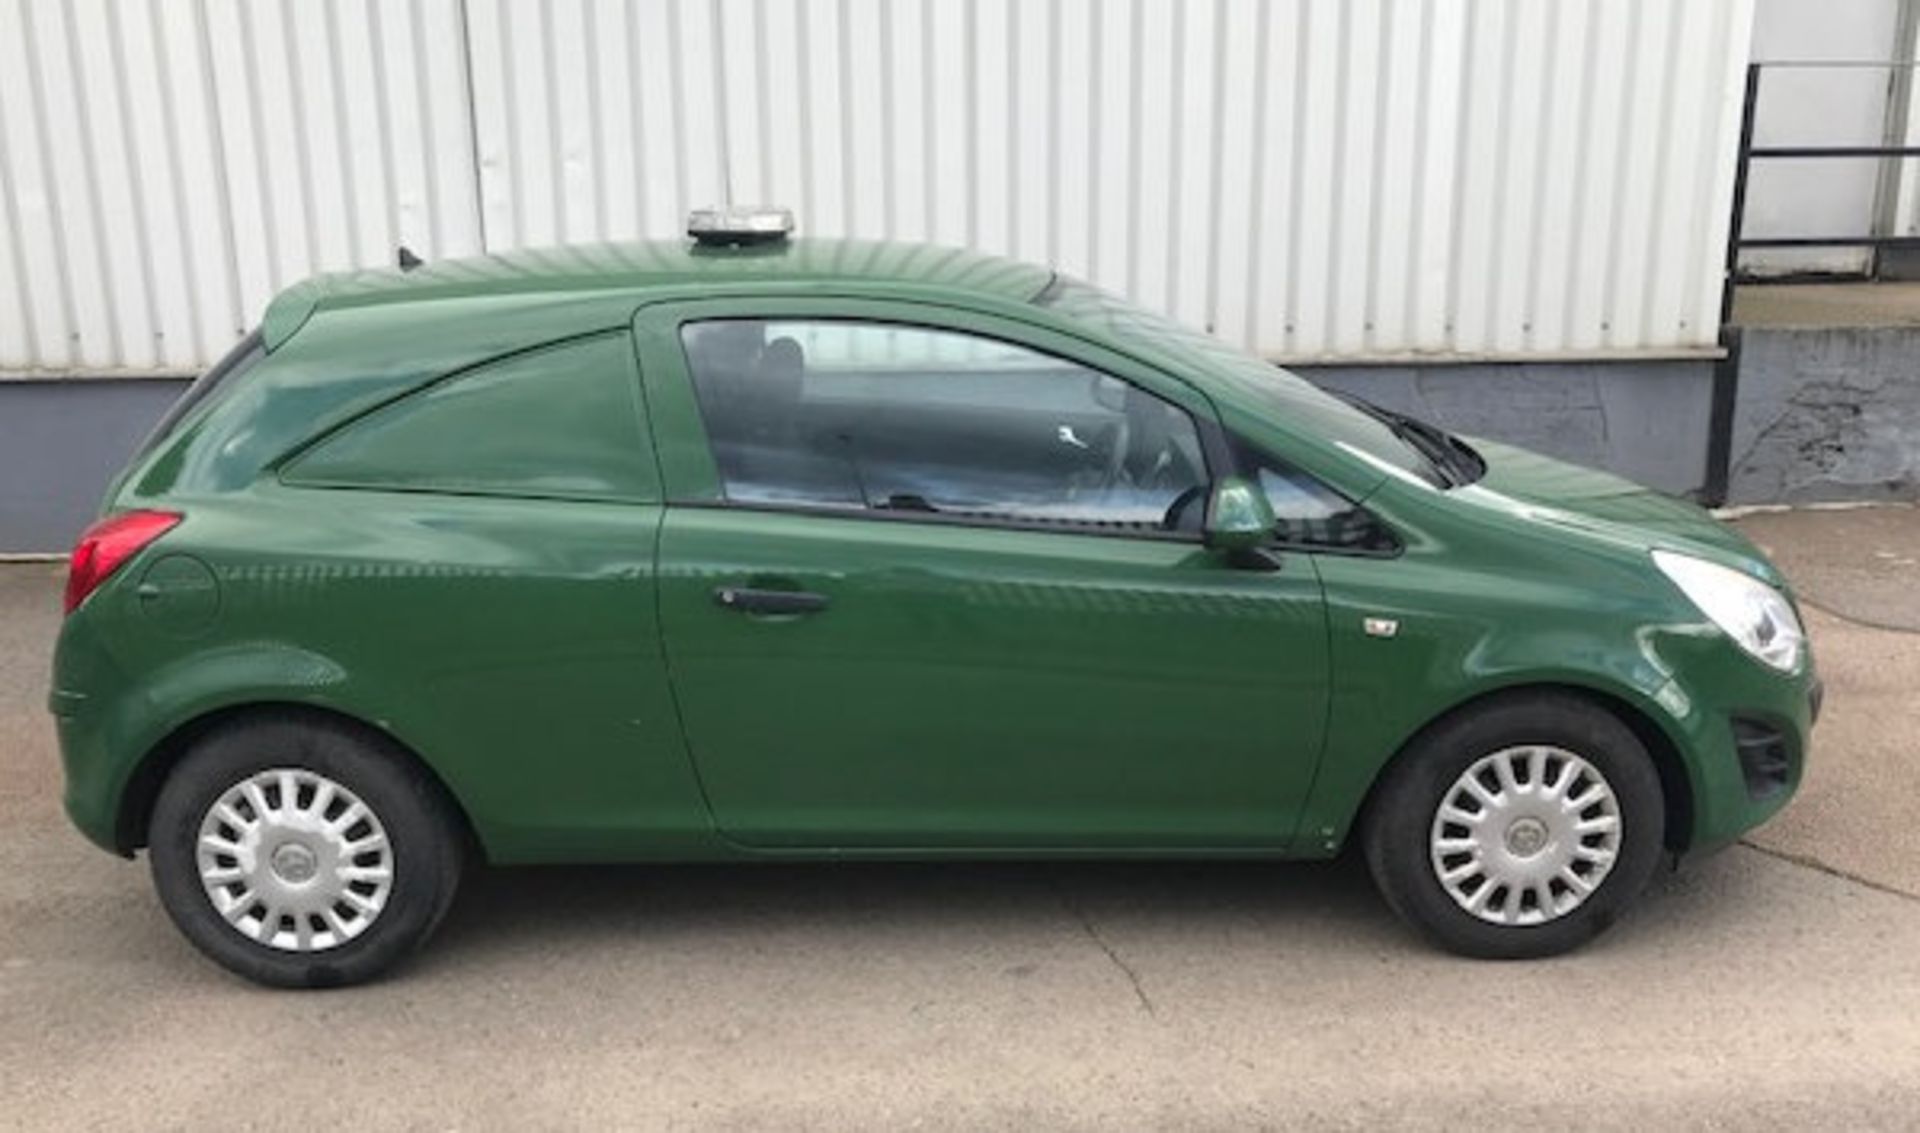 2012 Vauxhall Corsa 1.3 CDTI 3 Dr Panel Van- CL505 - Location: Corby, Northamptonshire - Image 2 of 11